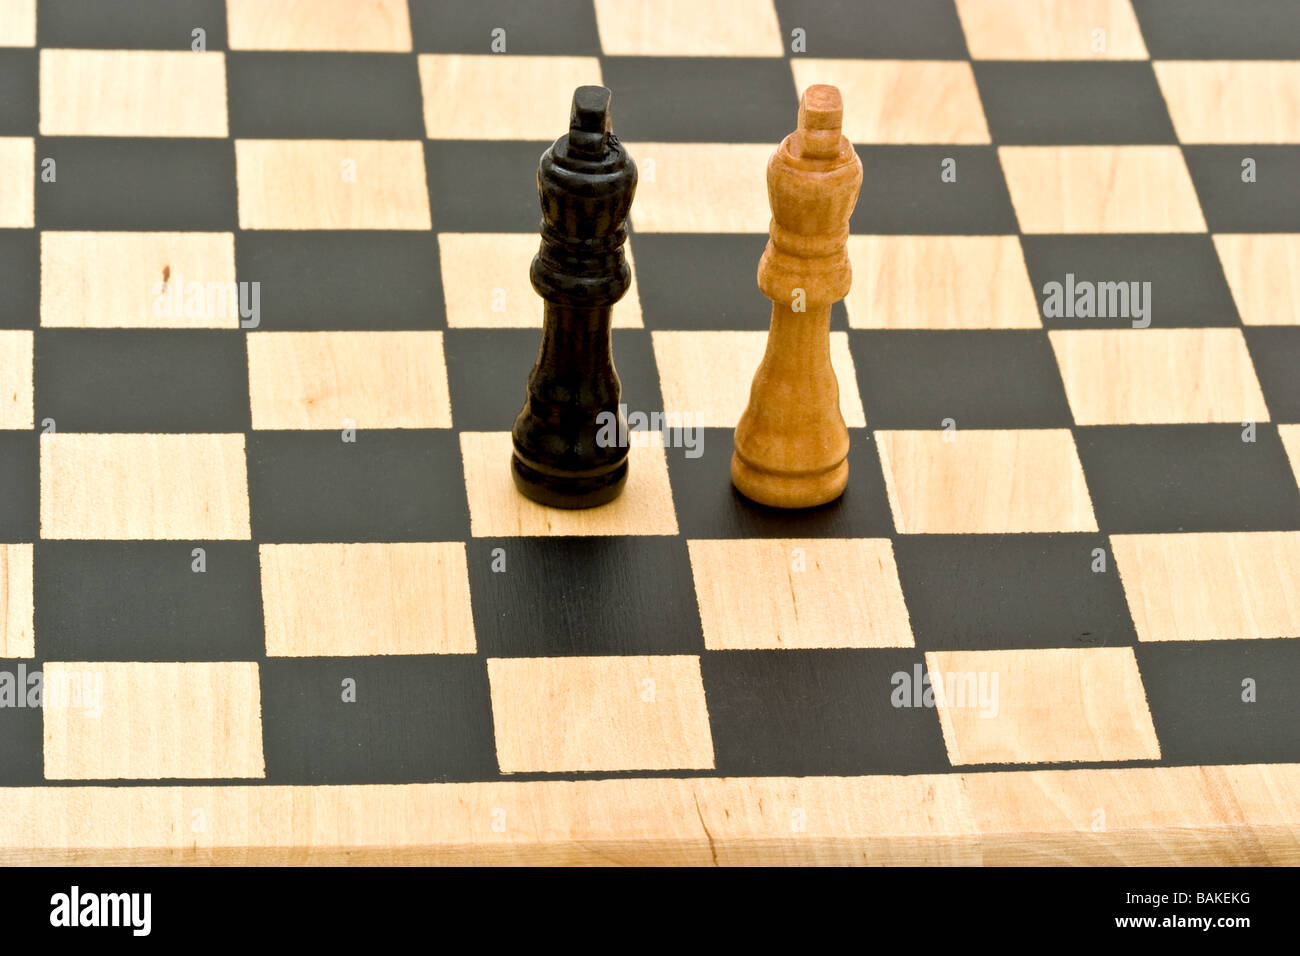 Two chess piece kings facing off on chess board Stock Photo